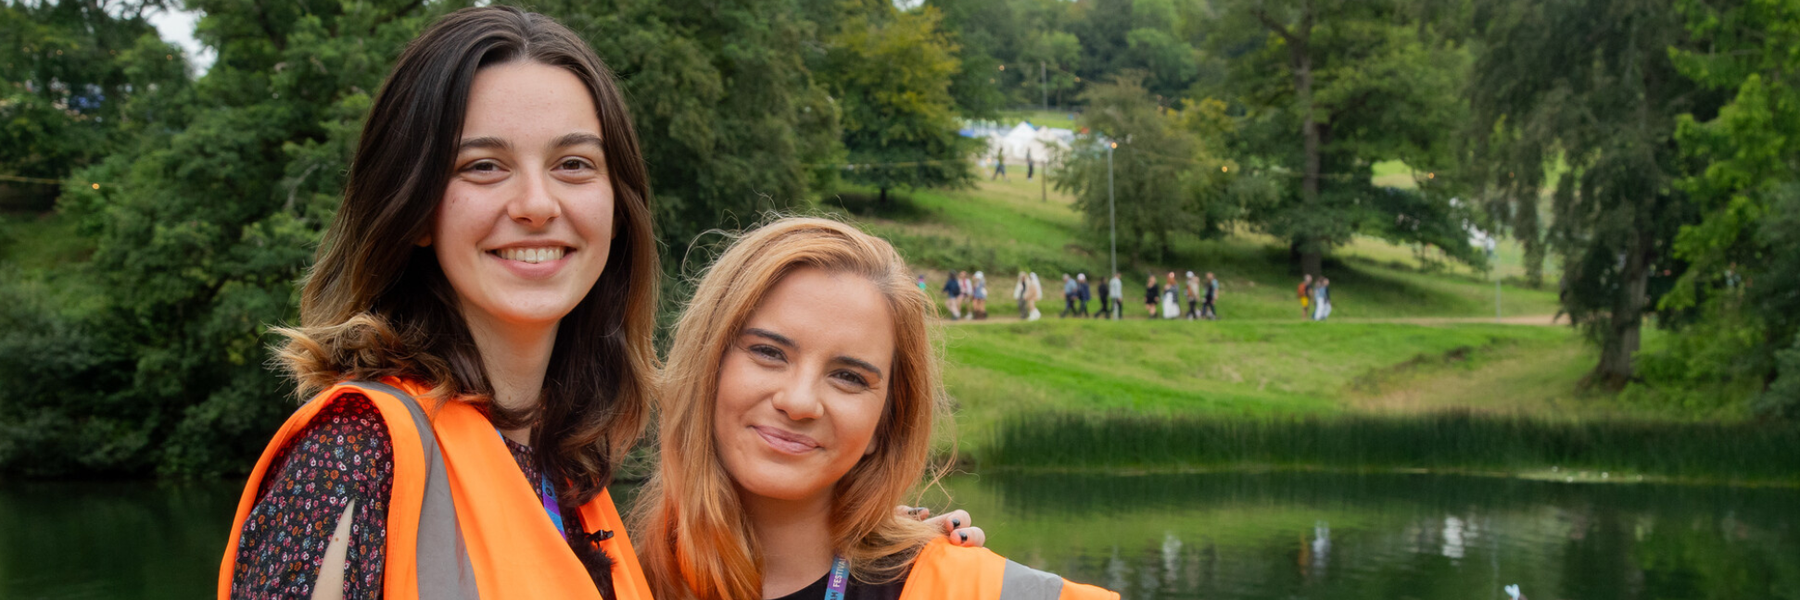 Gwen and Lauren smiling in front of a lake at Wilderness Festival